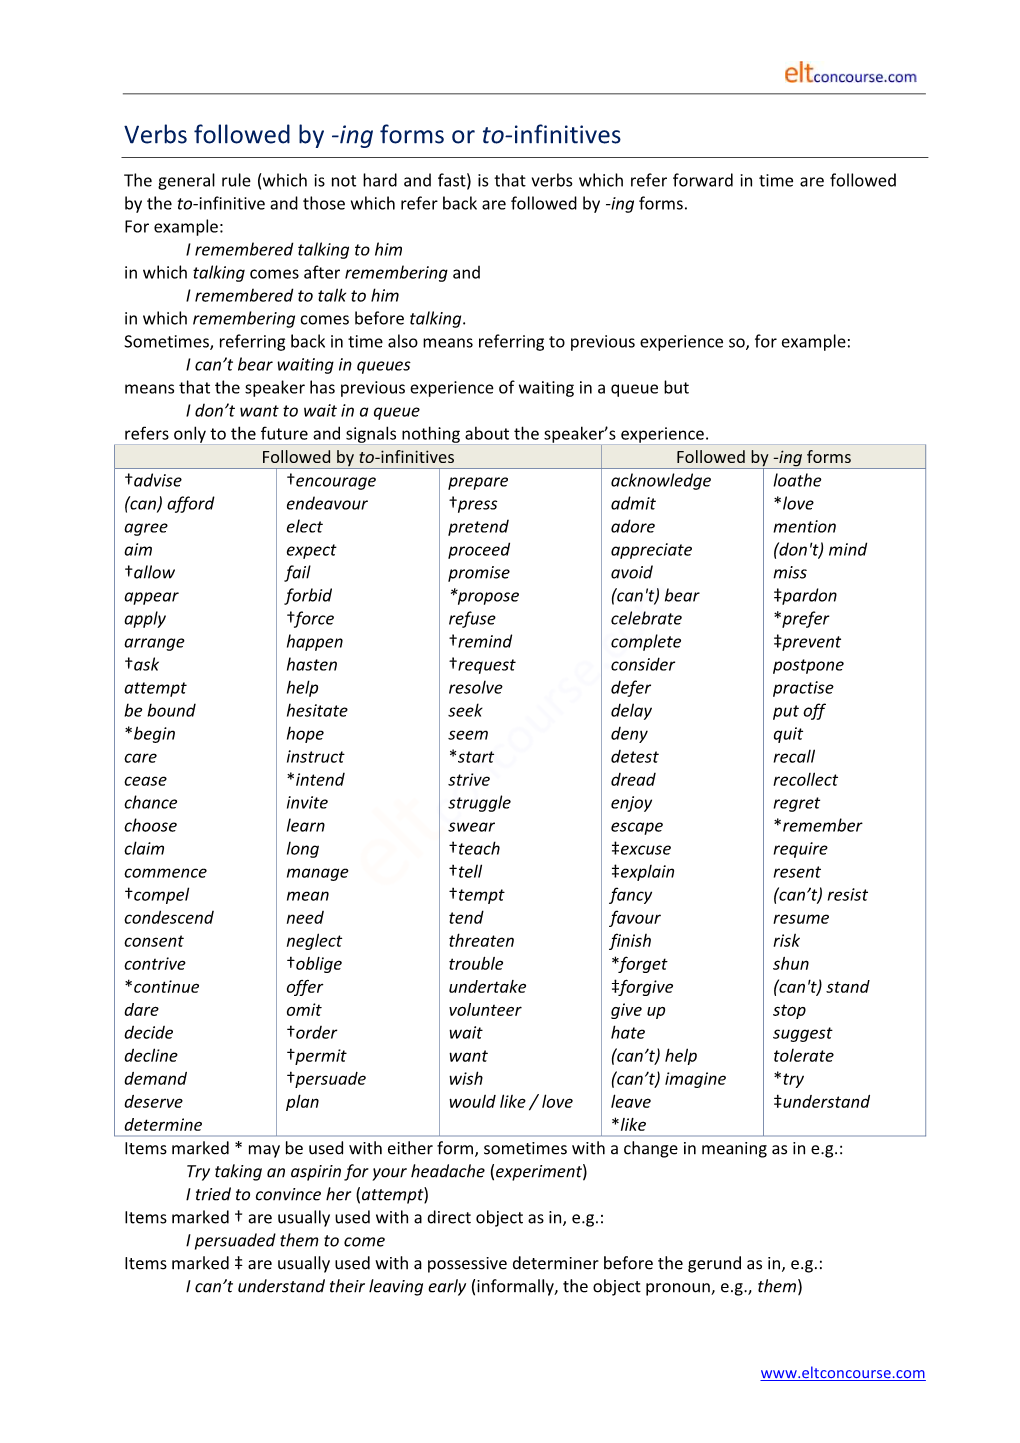 Verbs Followed by -Ing Forms Or To-Infinitives